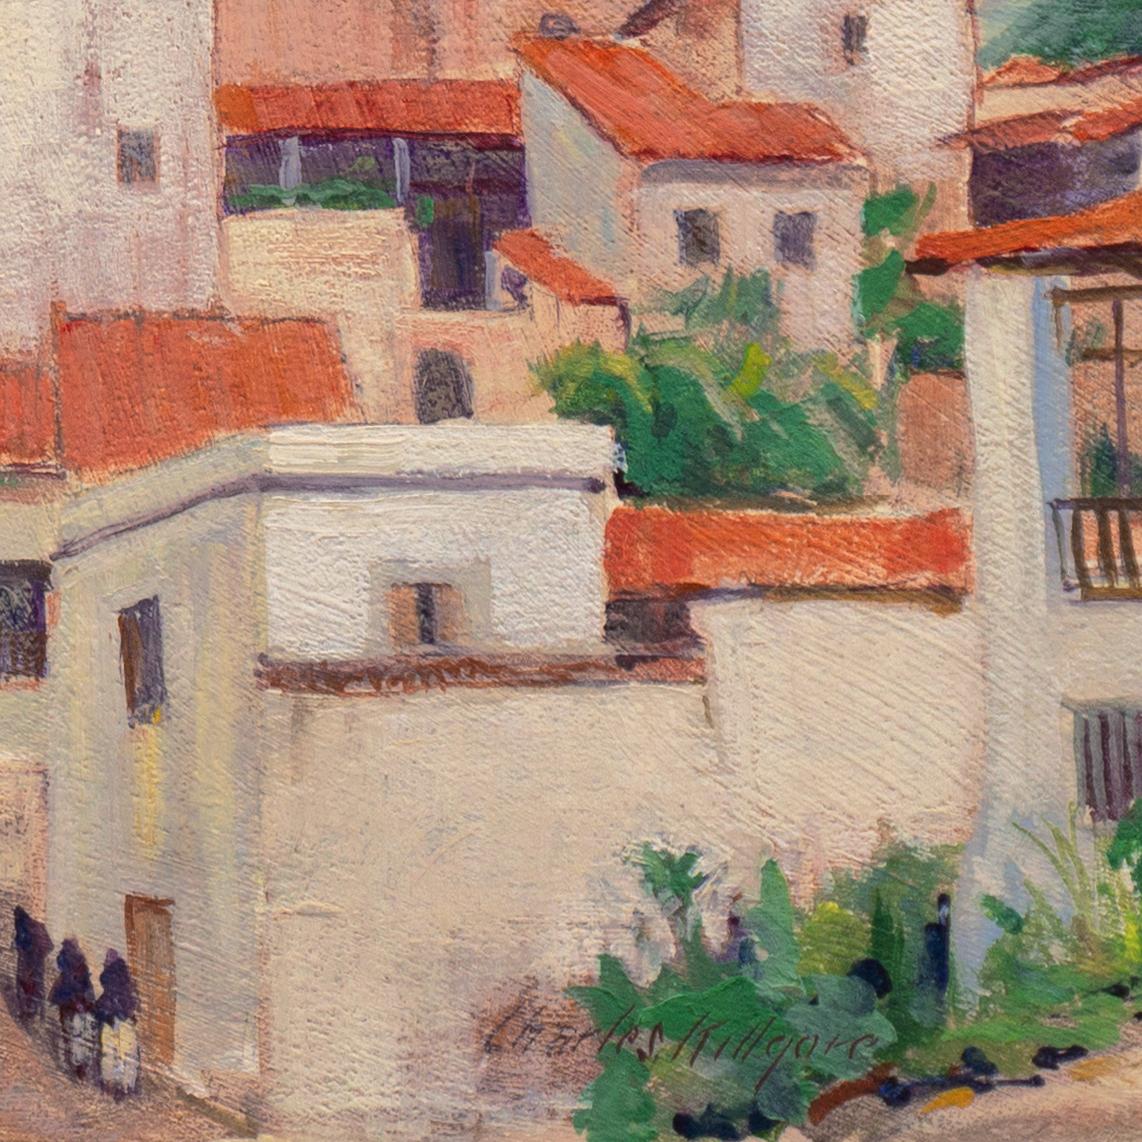 Taxco, Mexique, Paris, Louvre, Who Was Who in American Art, PAFA, AIC - Painting de Charles Killgore